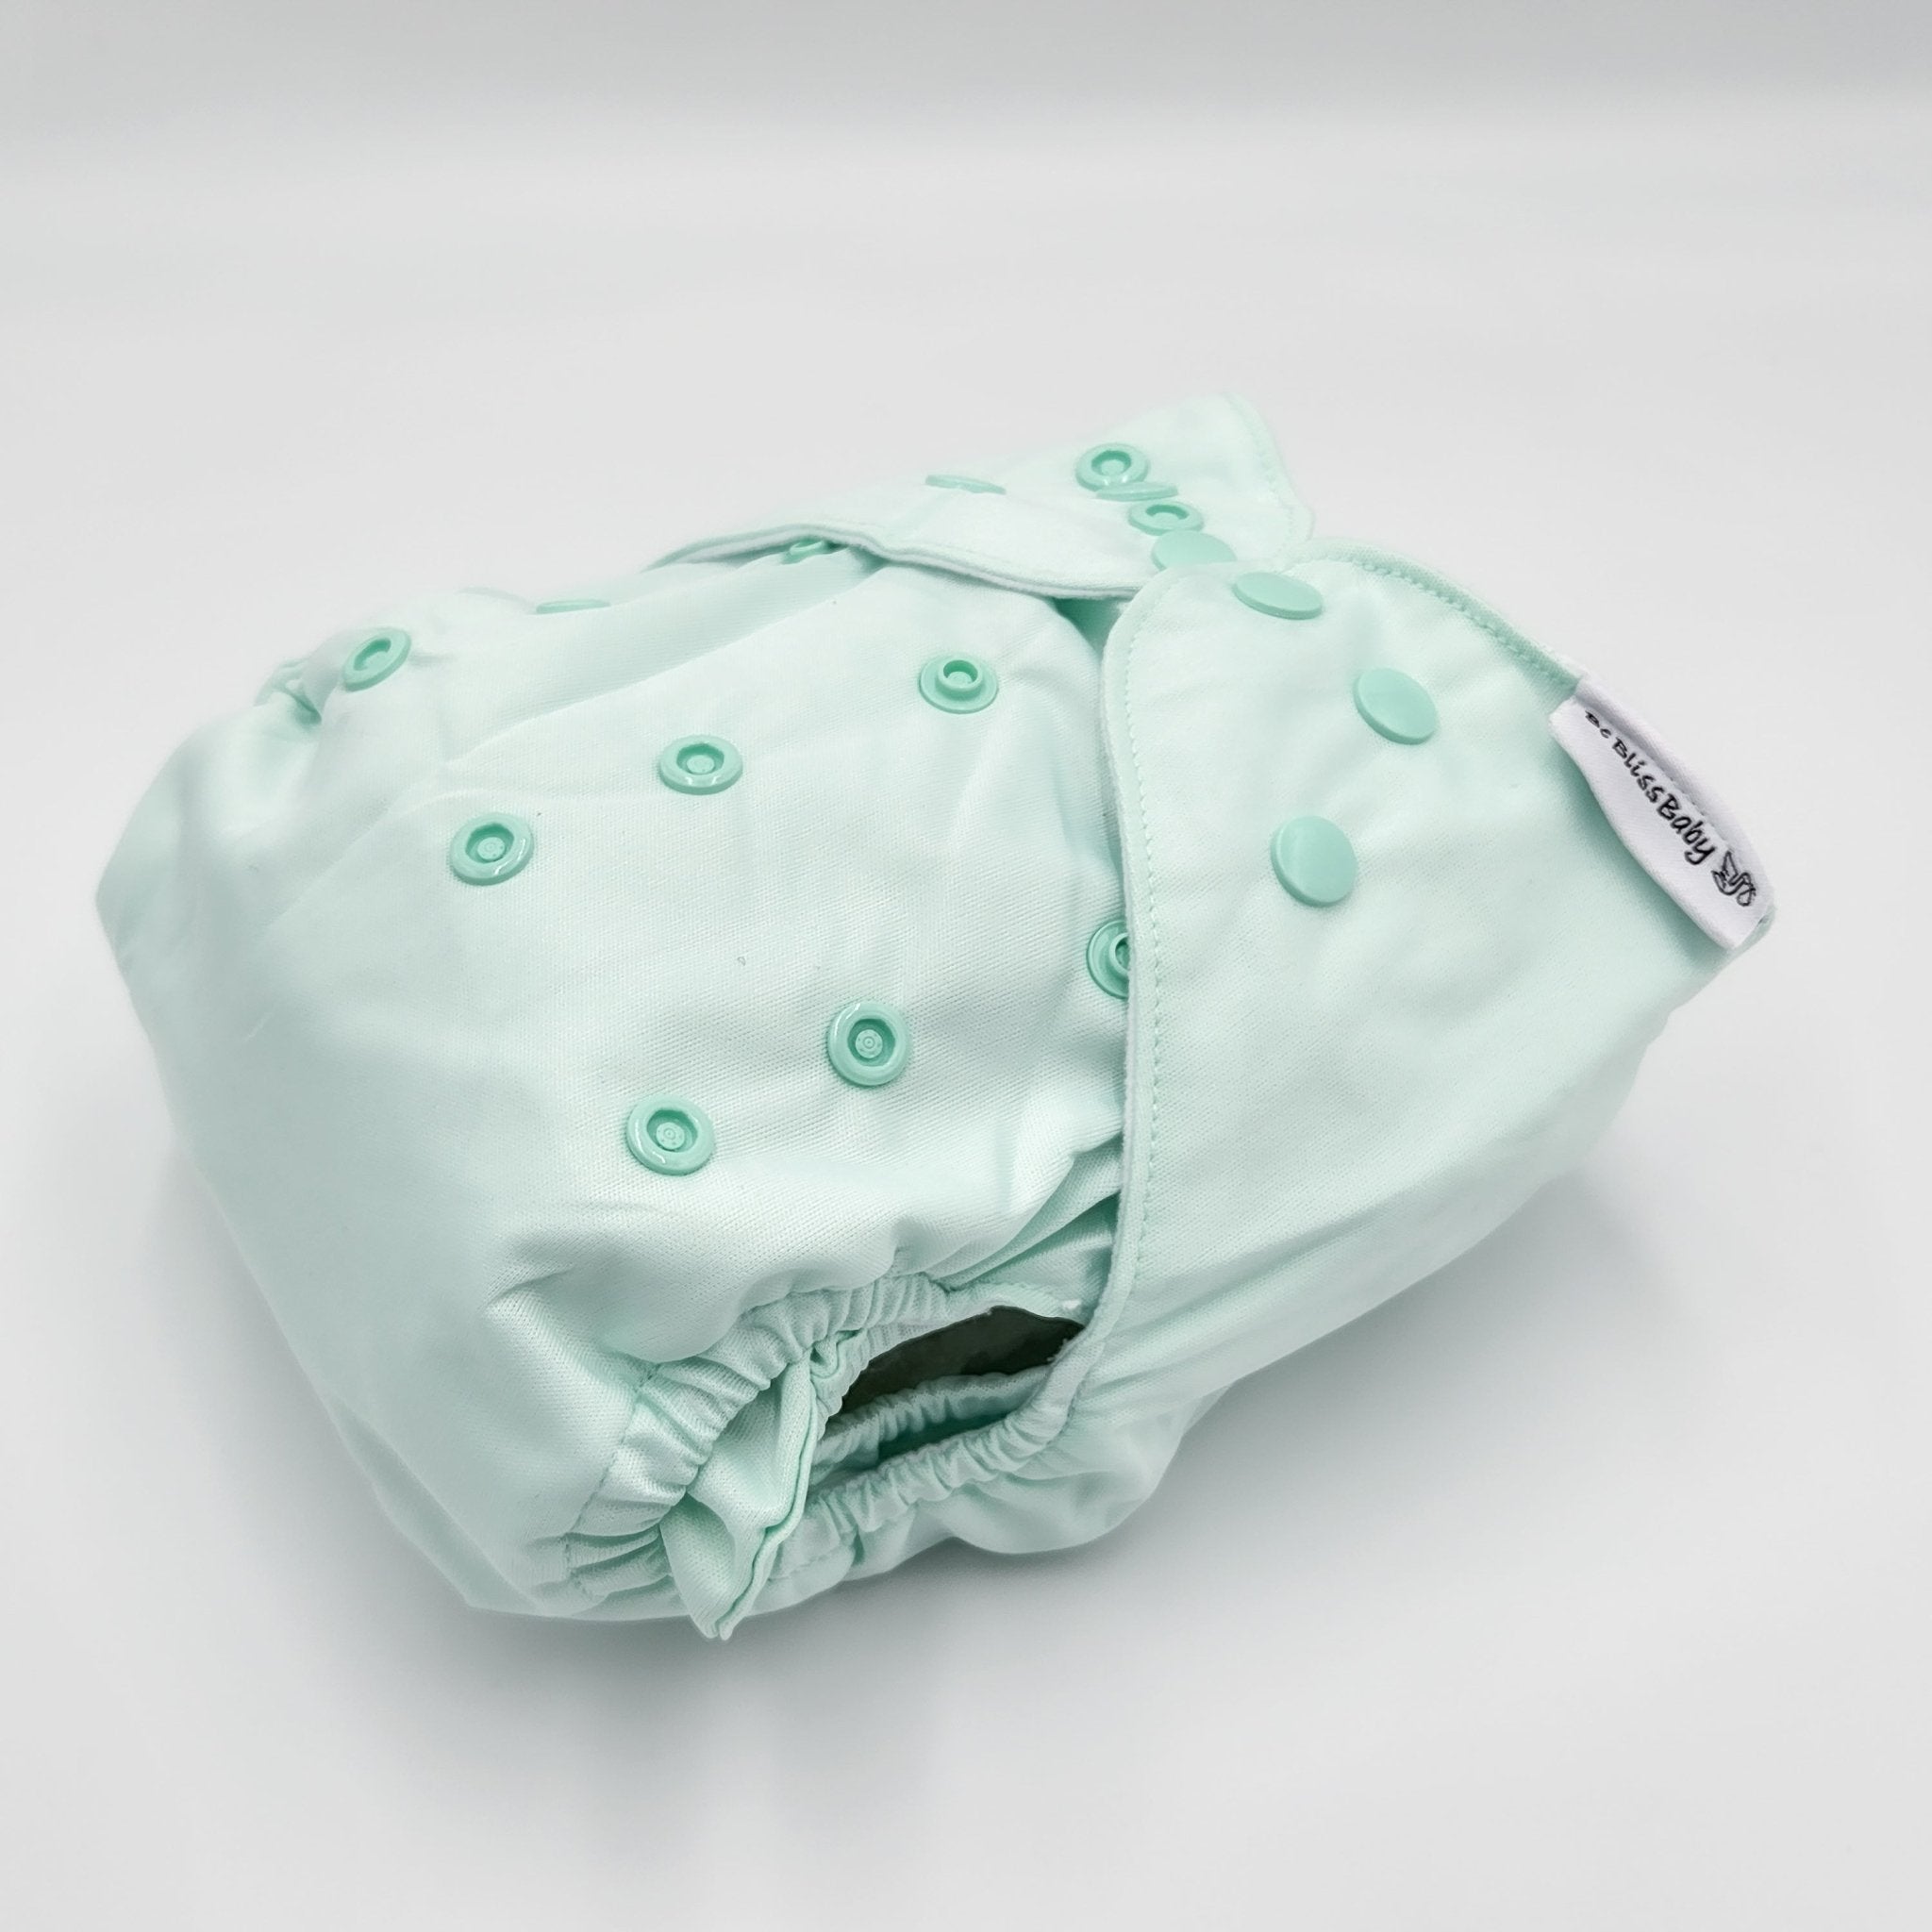 Reusable Modern Cloth Nappy 2.0 - Mint - Be Bliss Baby